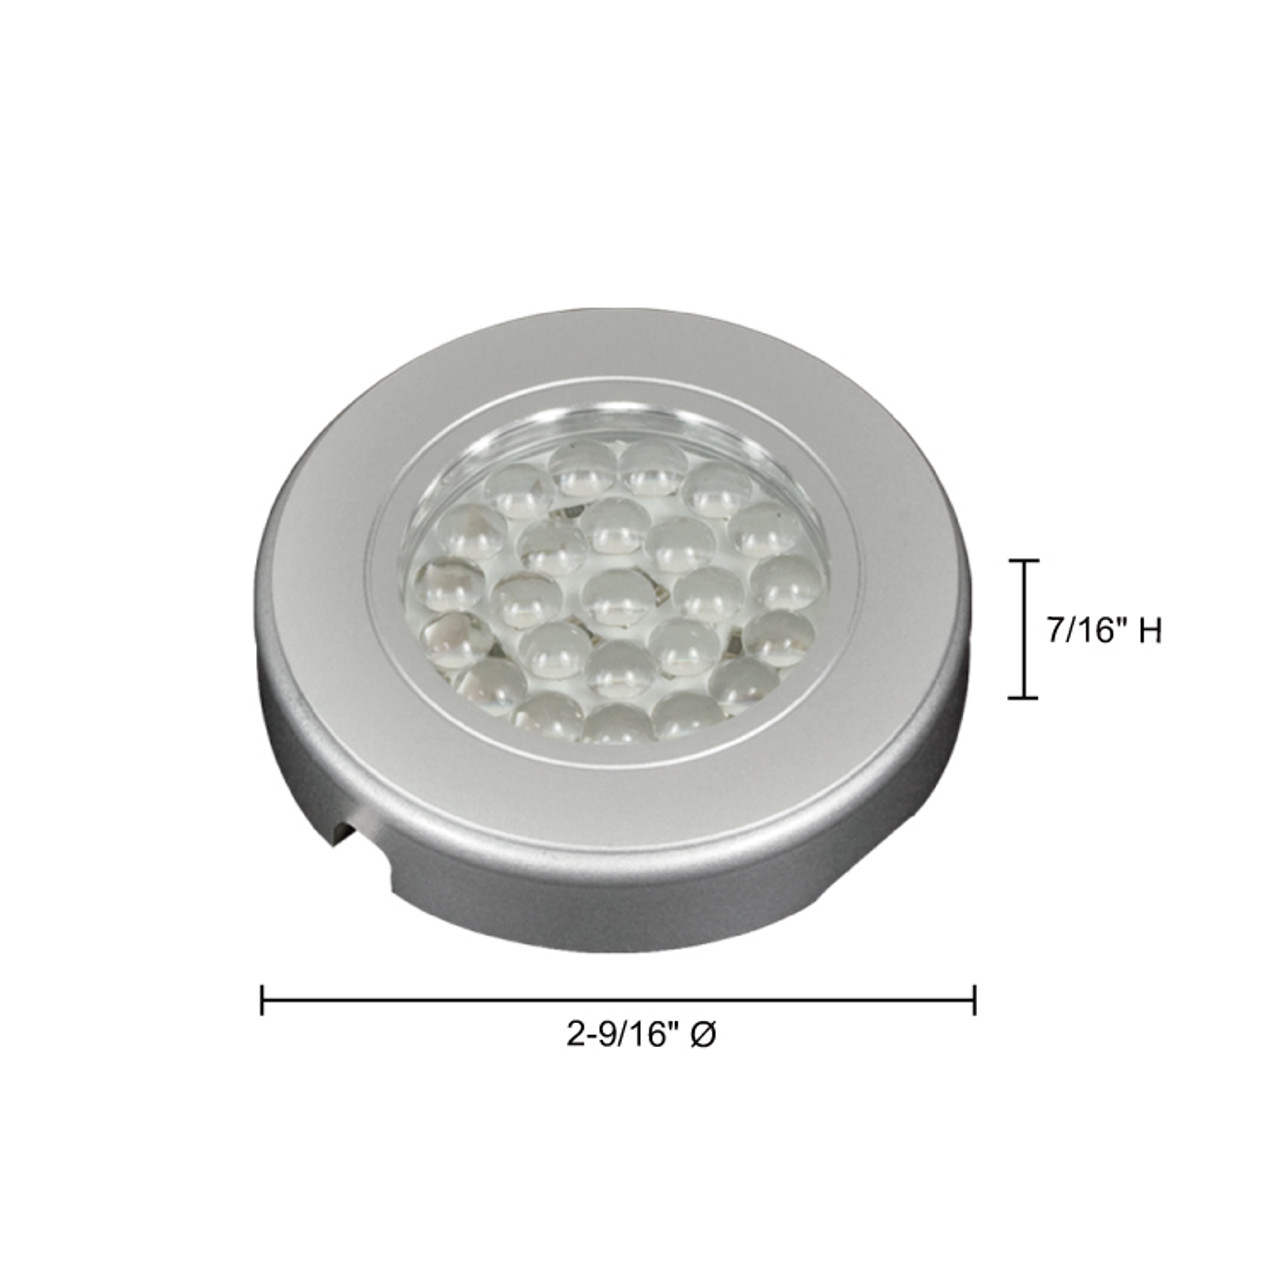 JESCO Lighting SD123CV4530-S 1.65W LED Orionis Recessed or Surface Mount, 3250K, Silver